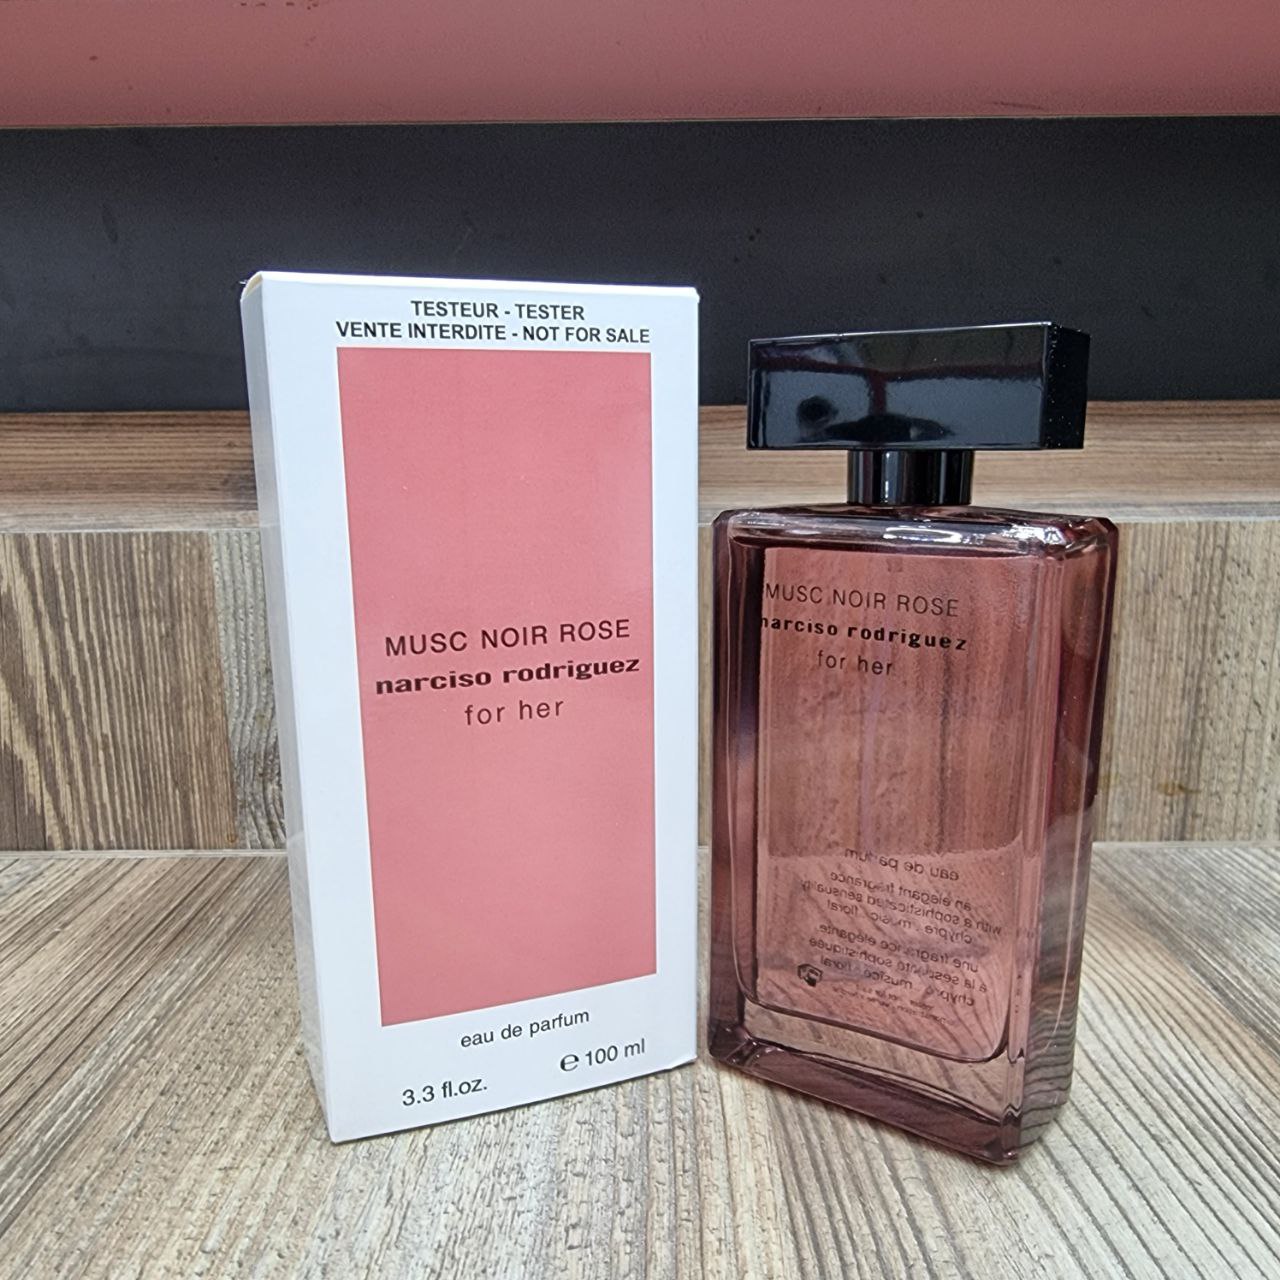 Narciso rodriguez musc noir rose for her. Нарциссо Родригес Нуар Роуз Маск отзывы.